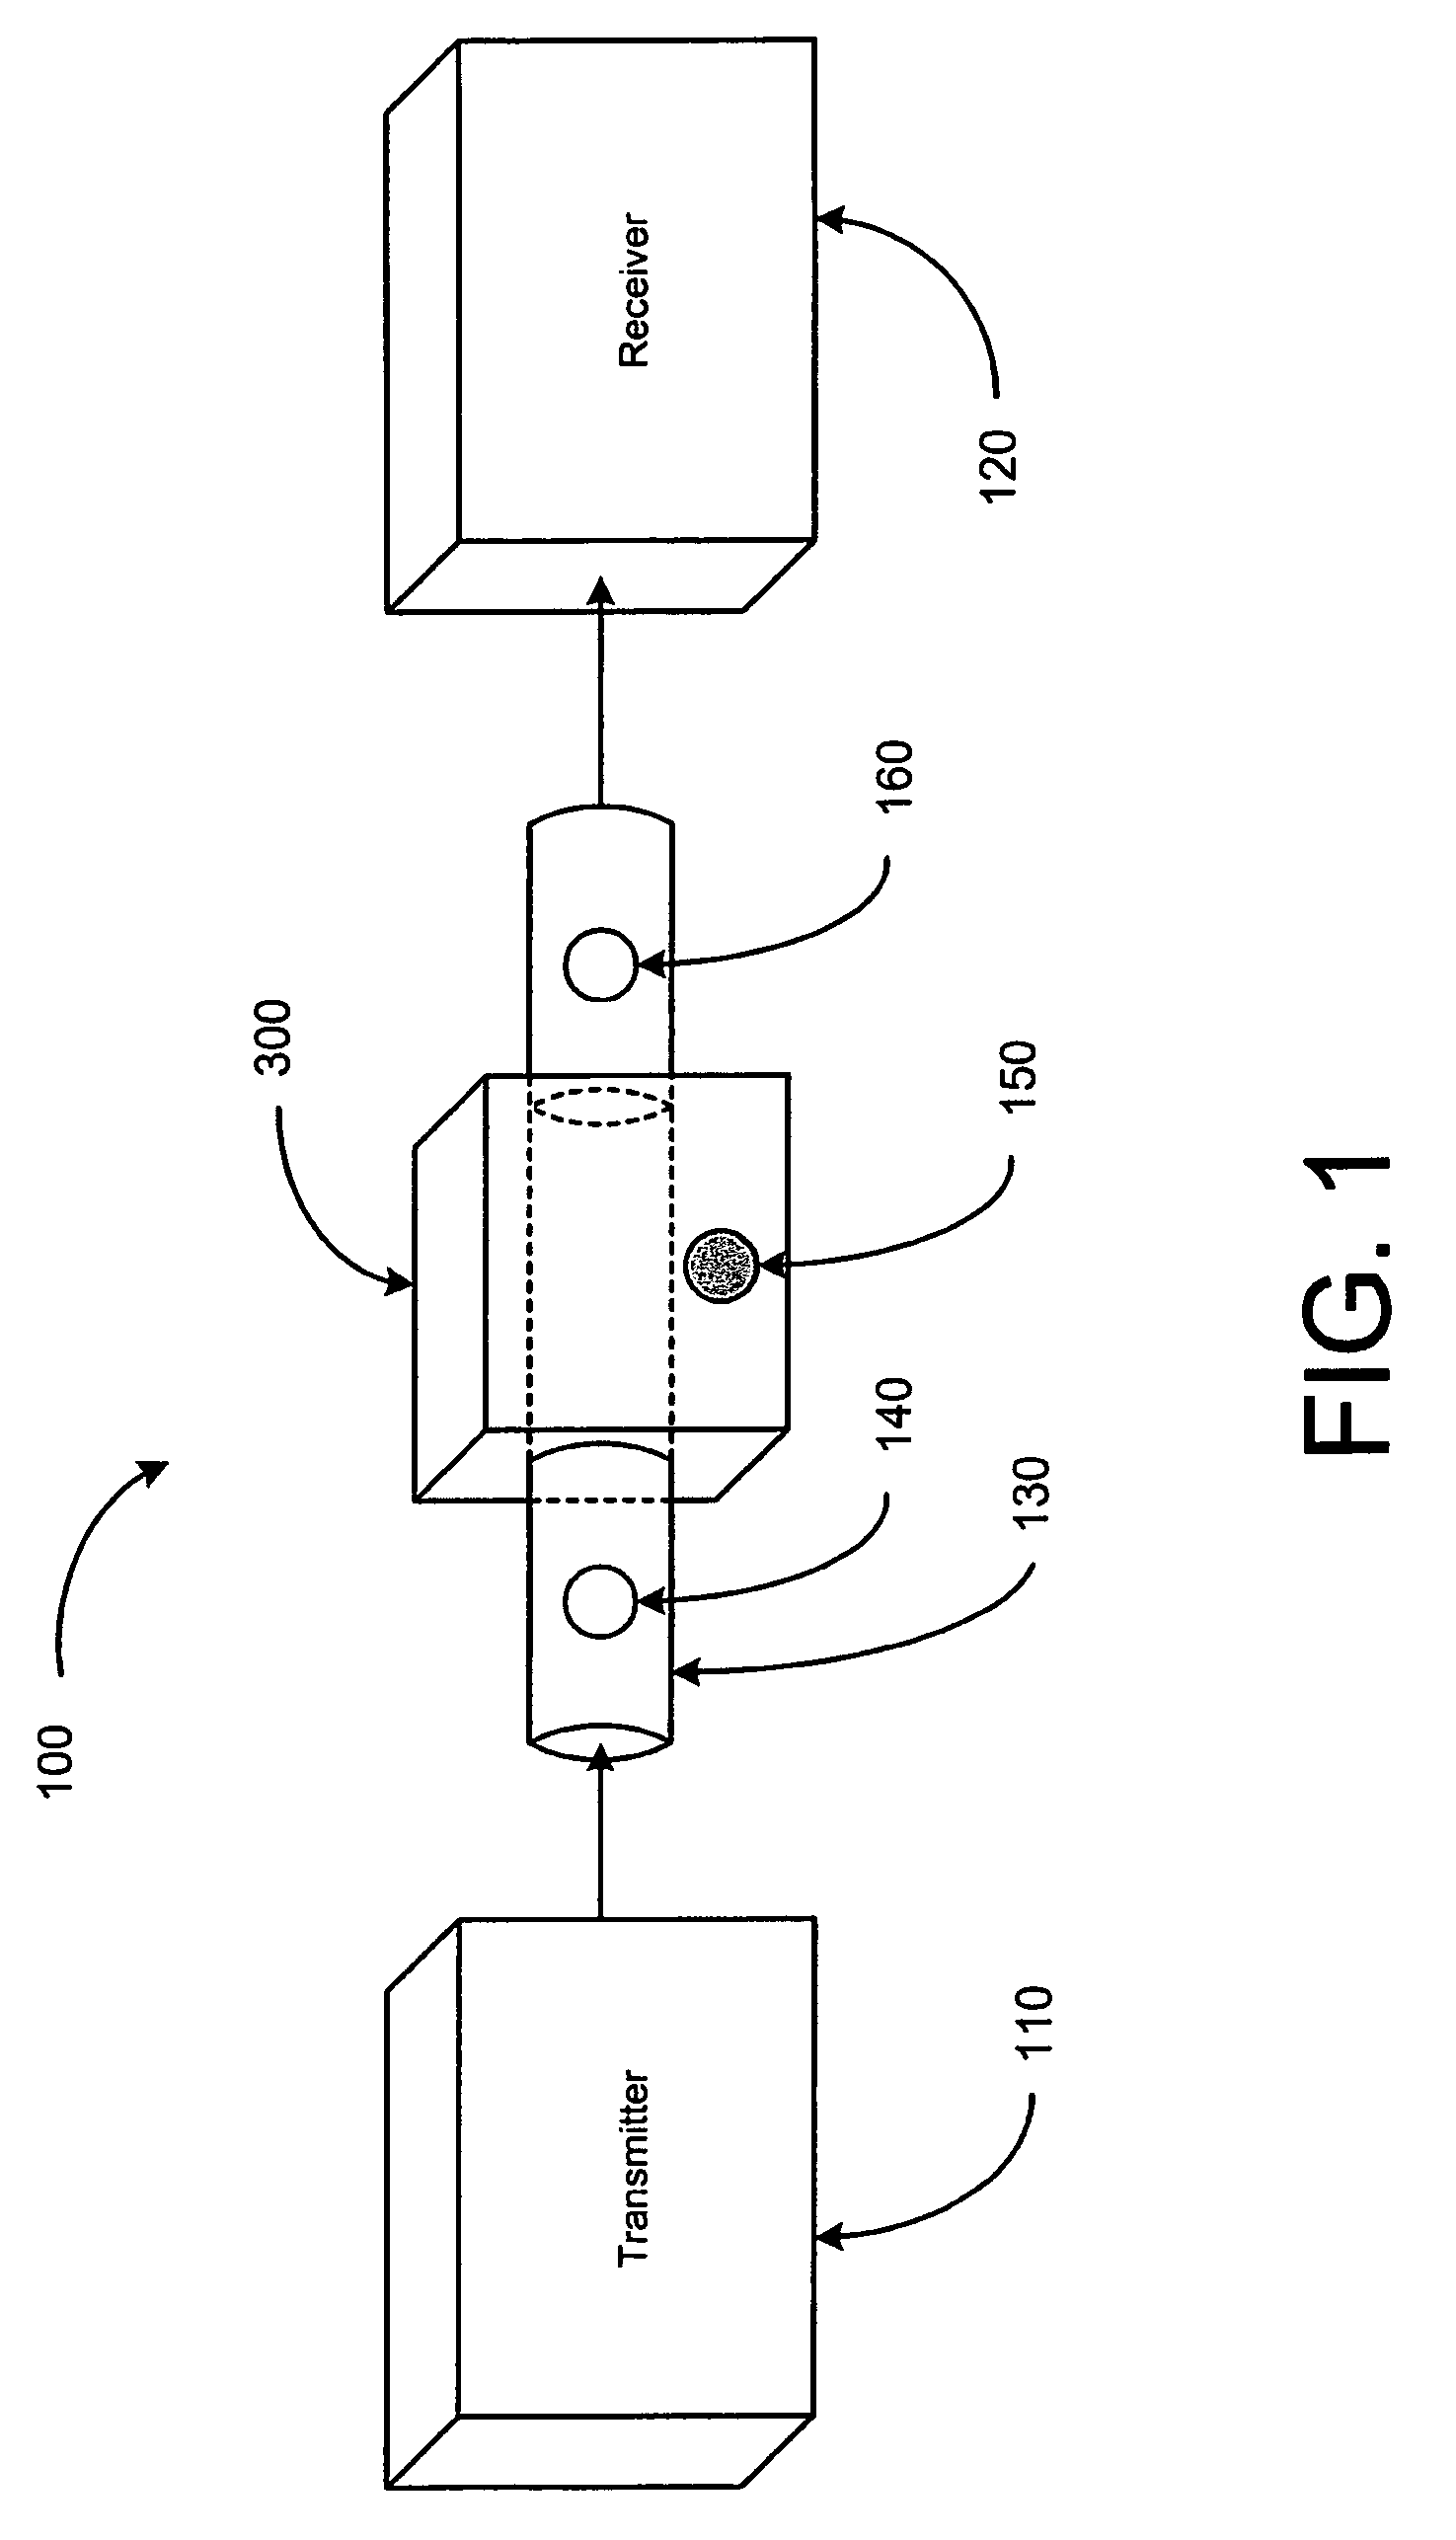 Systems and methods for obtaining information on a key in BB84 protocol of quantum key distribution